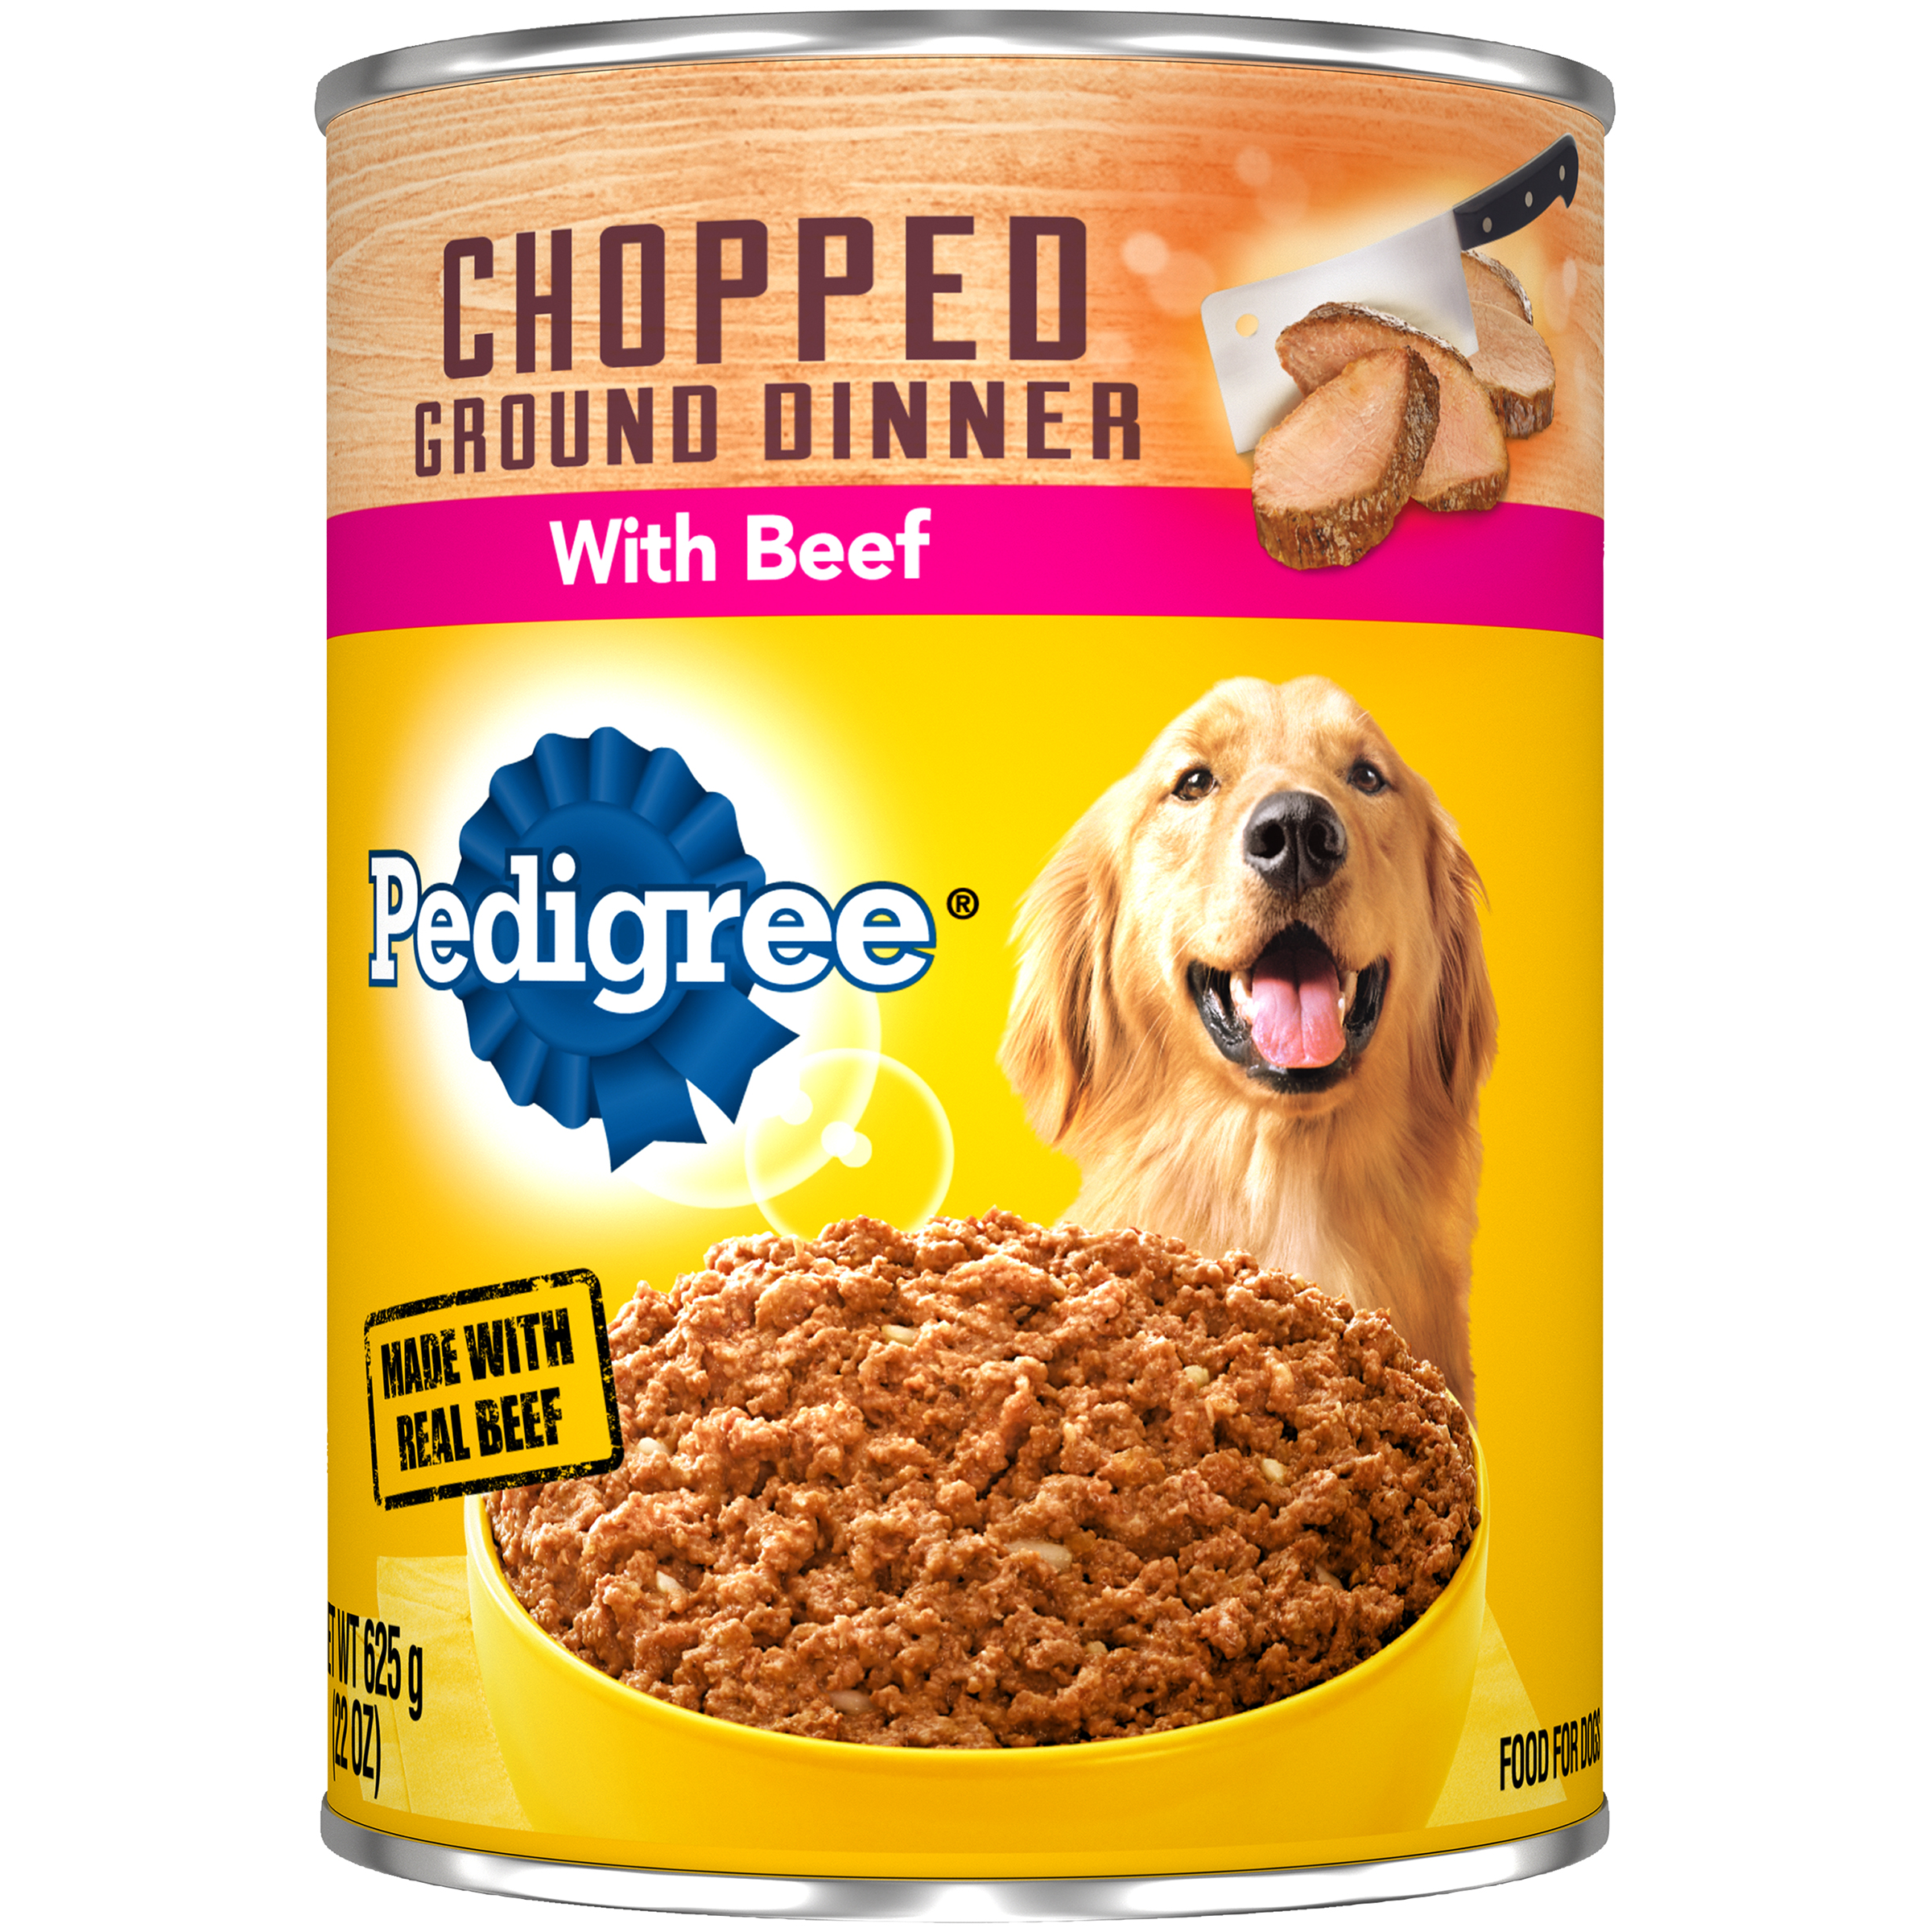 Pedigree Food for Adults Dogs, Traditional Ground Dinner with Chopped Beef, 22 oz (625 g)